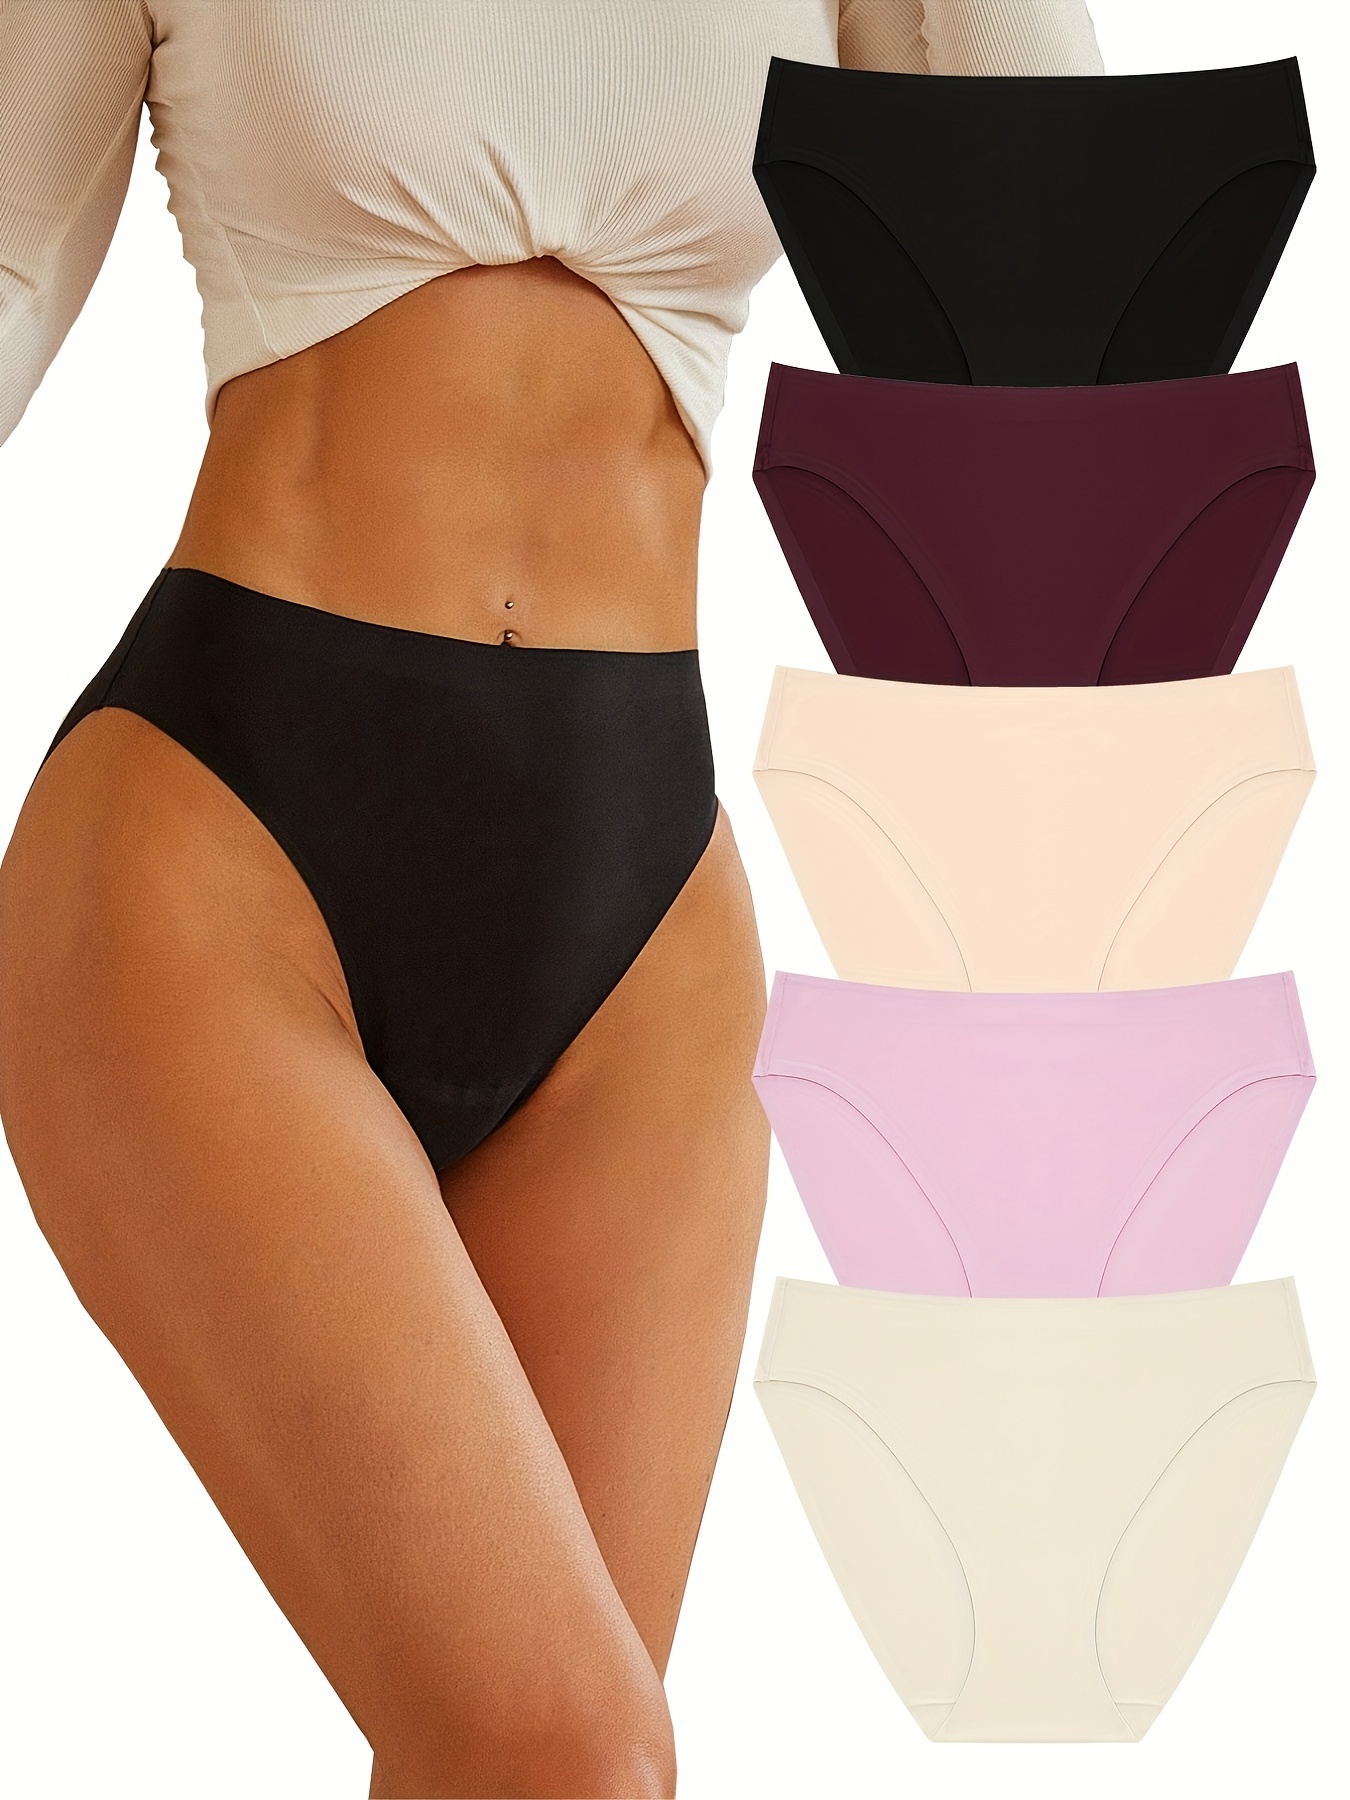 3pcs High Waist Thongs, Soft & Comfy Stretchy Intimates Panties, Women's  Lingerie & Underwear